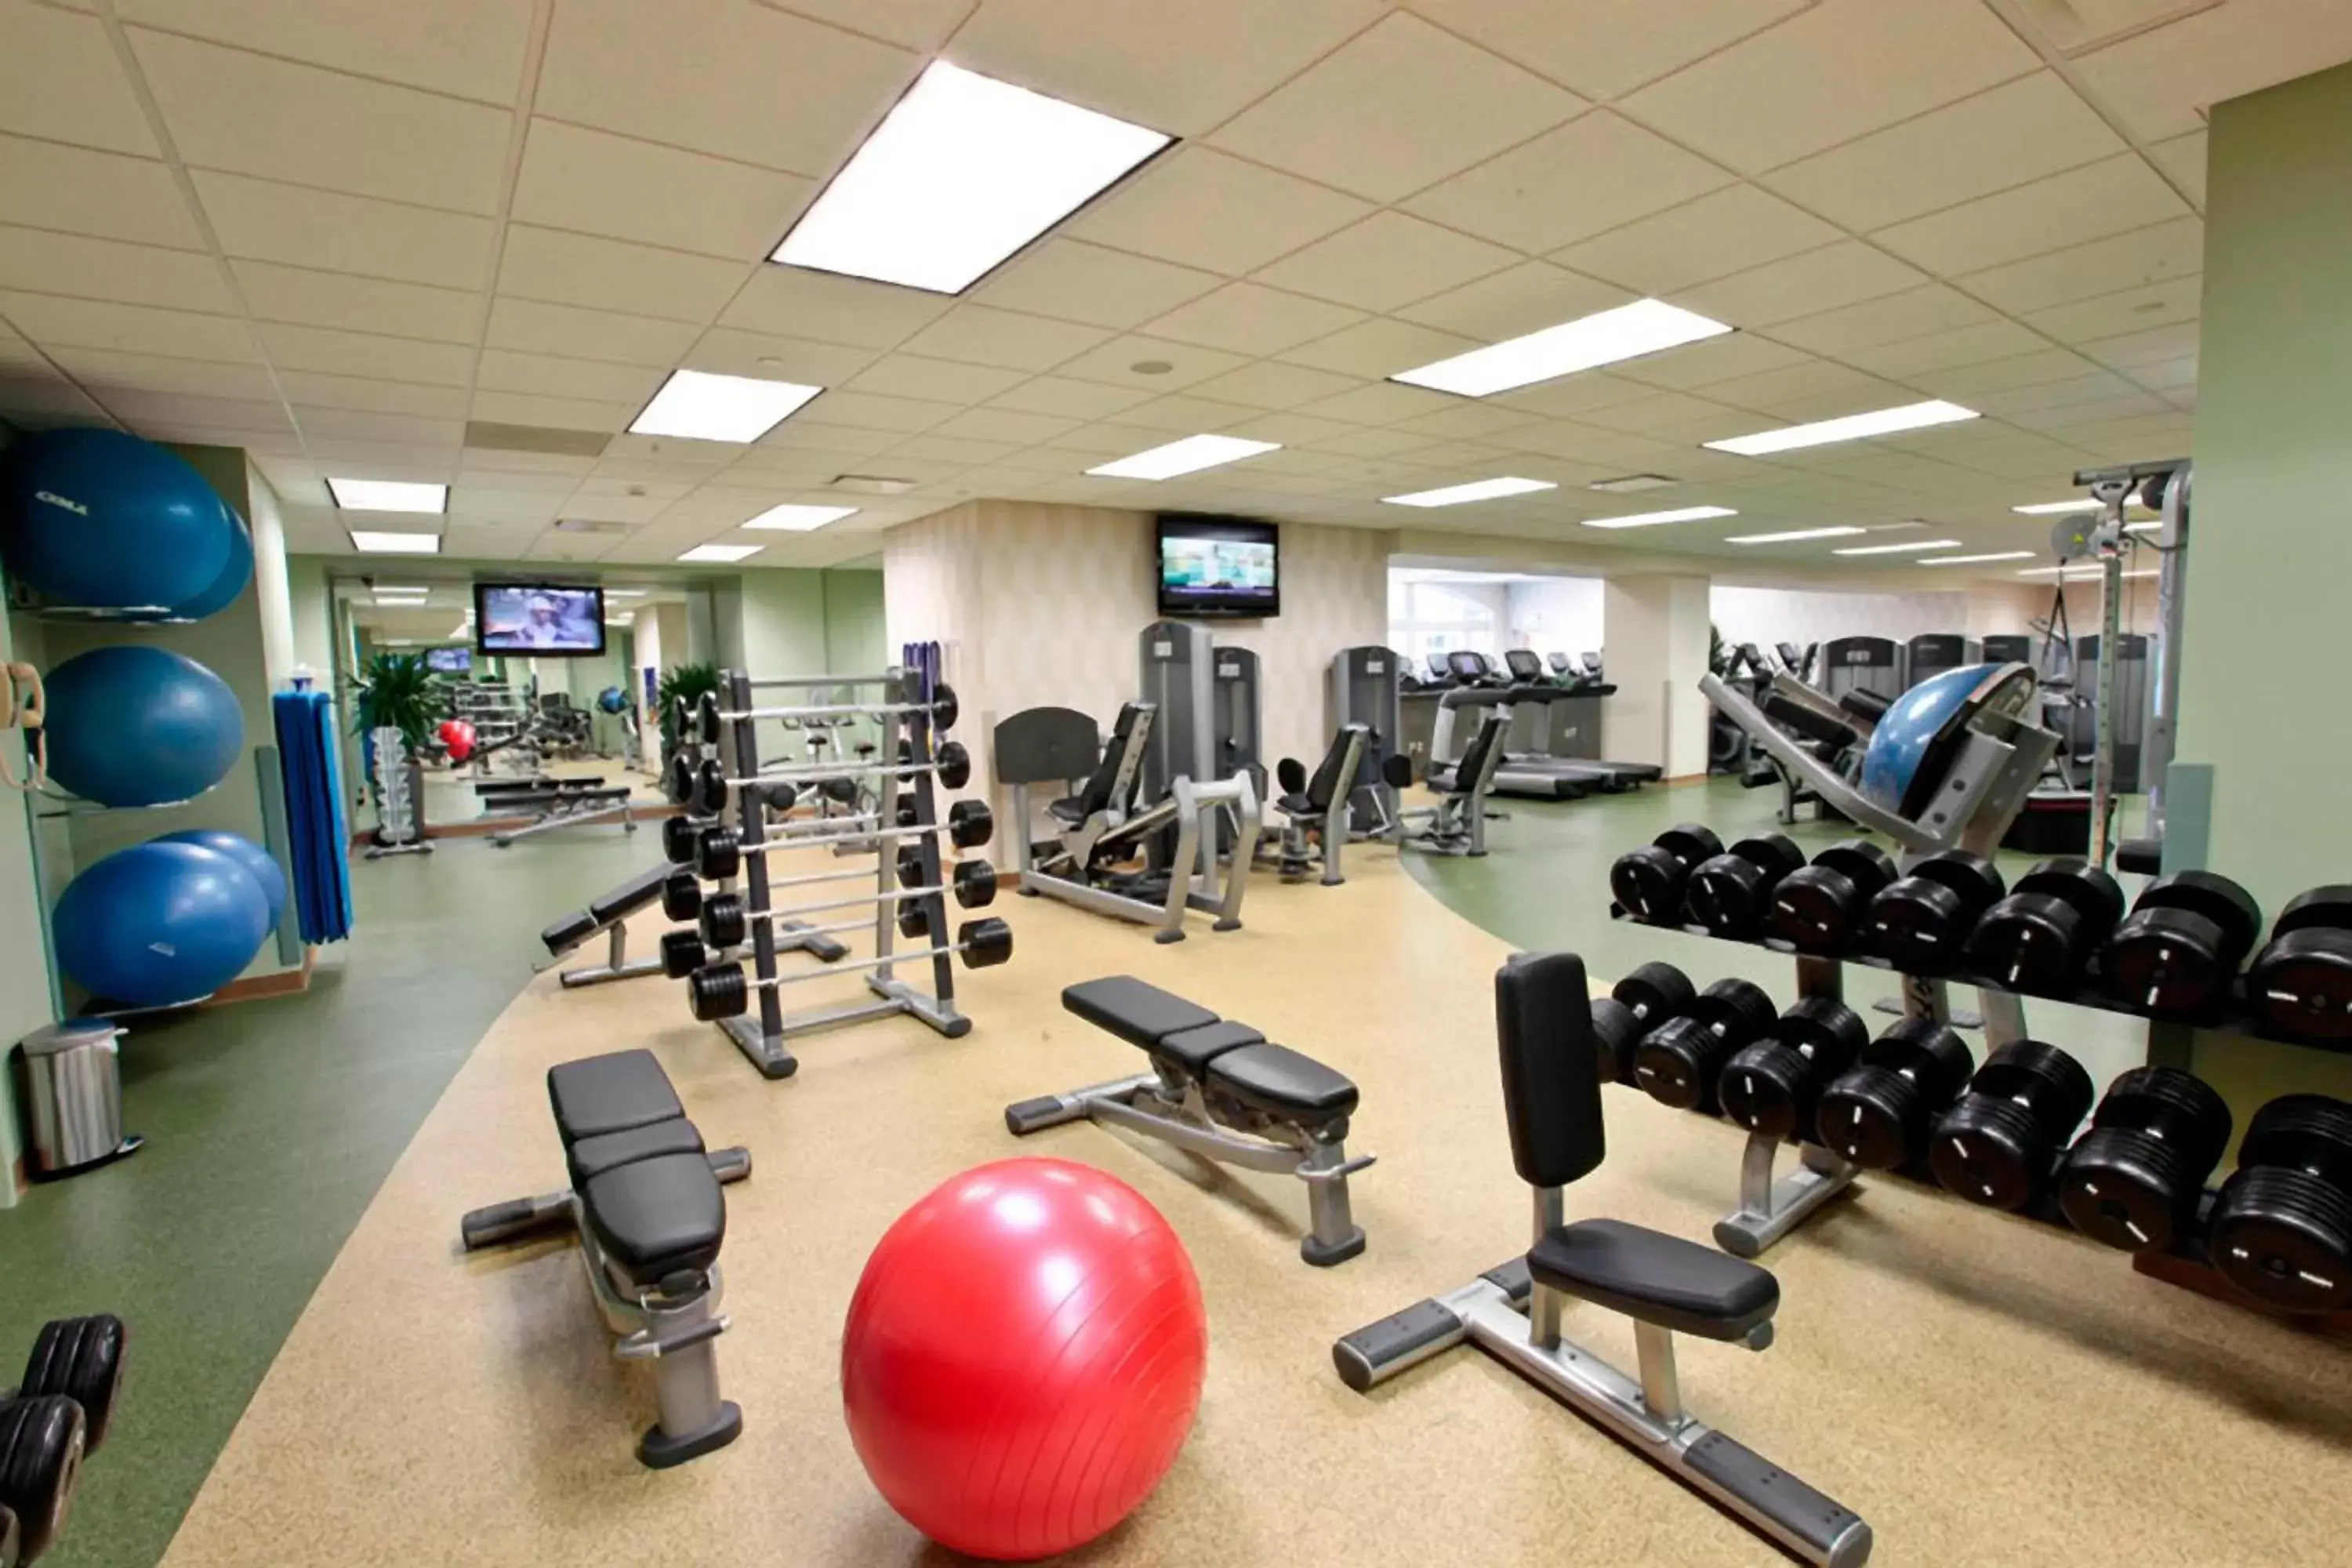 Fitness centre/facilities, Fitness Center/Facilities in Gaylord Palms Resort & Convention Center